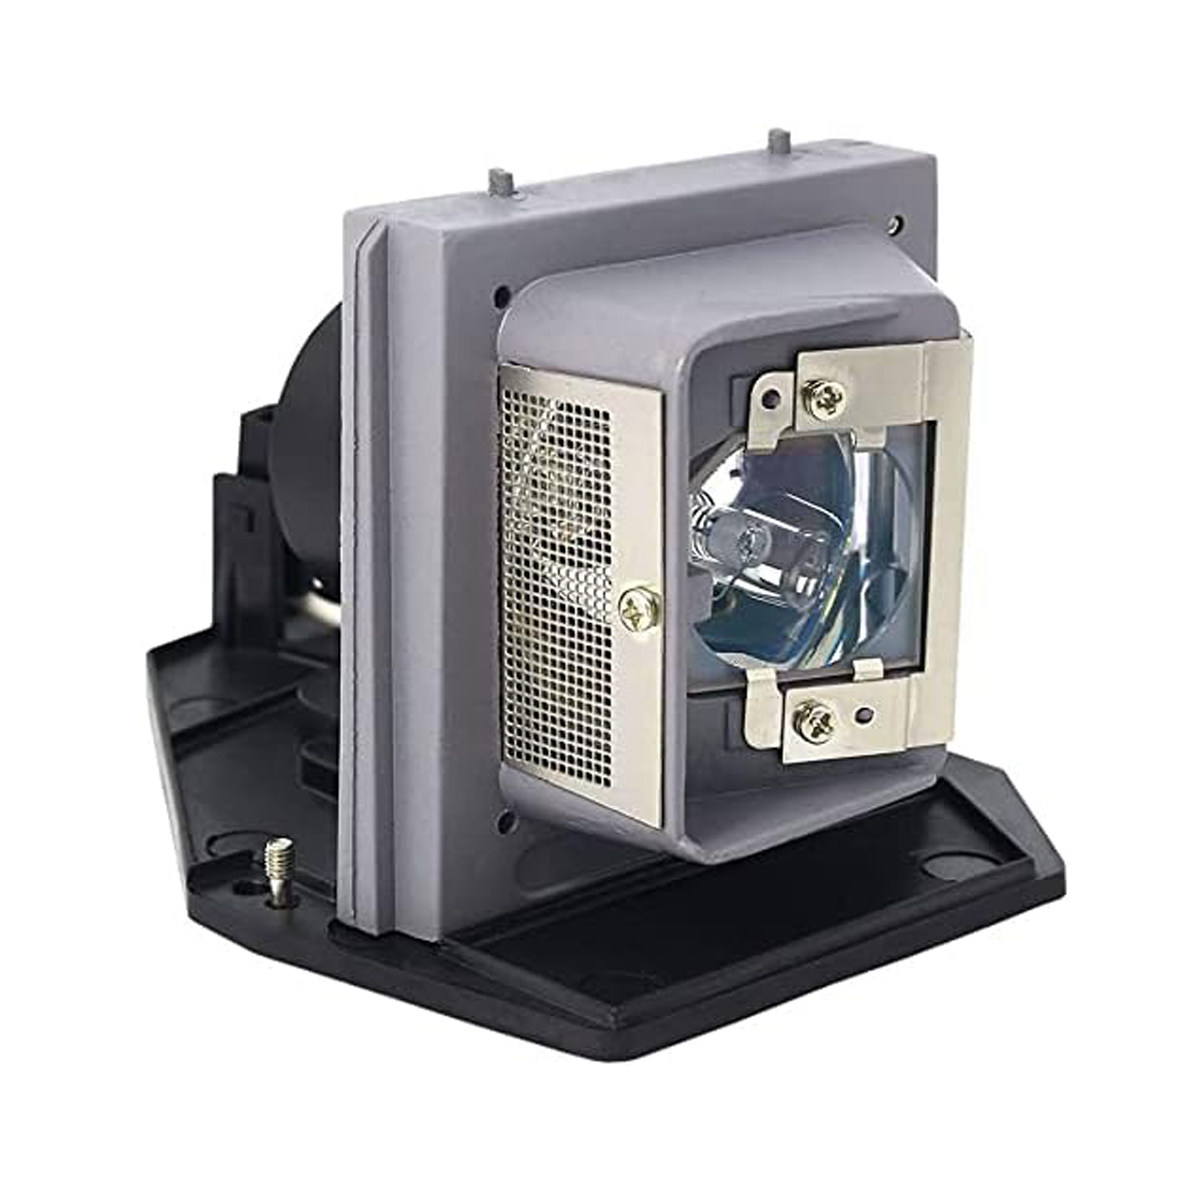 Replacement Projector lamp 78-6969-9957-8 For 3M SCP717 SCP740